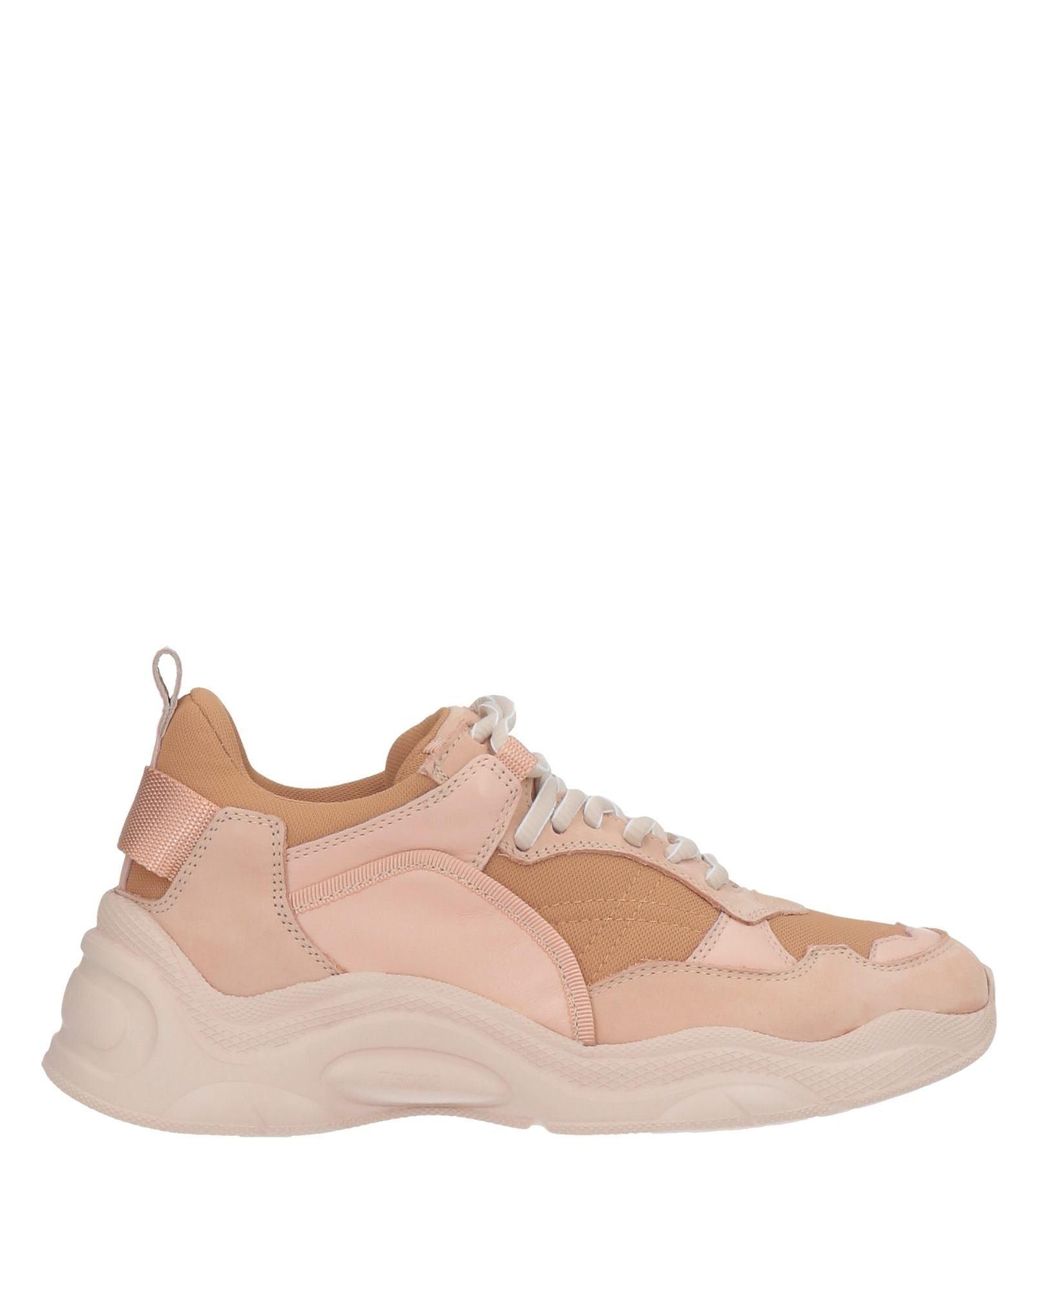 IRO Leather Sneakers in Blush (Pink) - Lyst